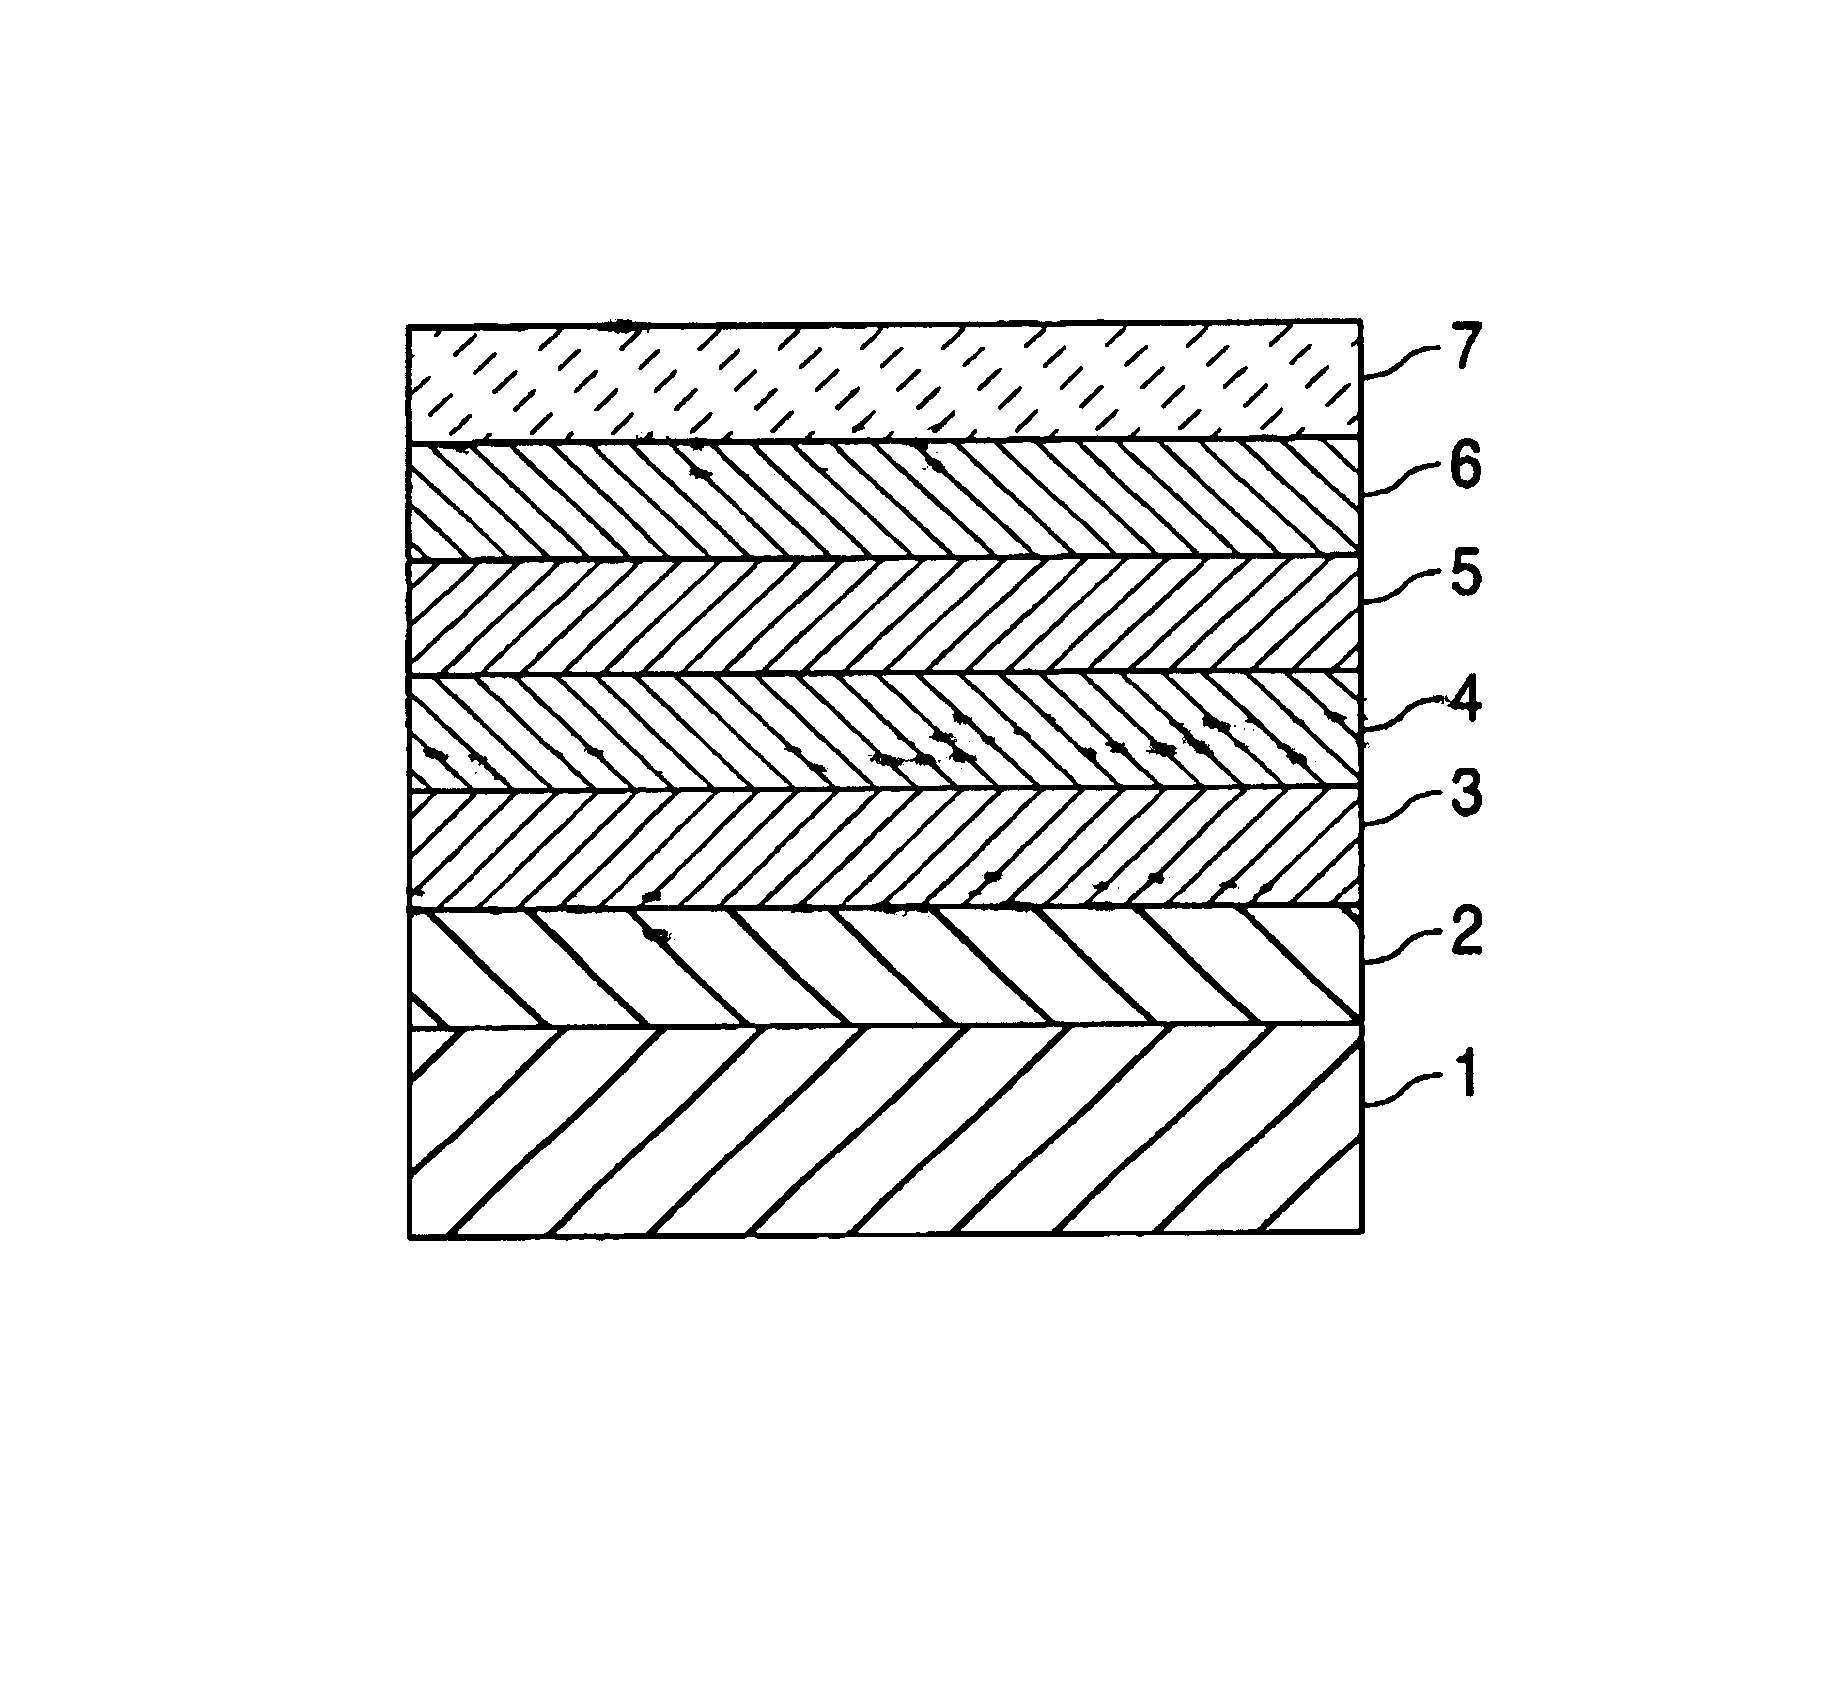 Coatings for implantable medical device containing polycationic peptides